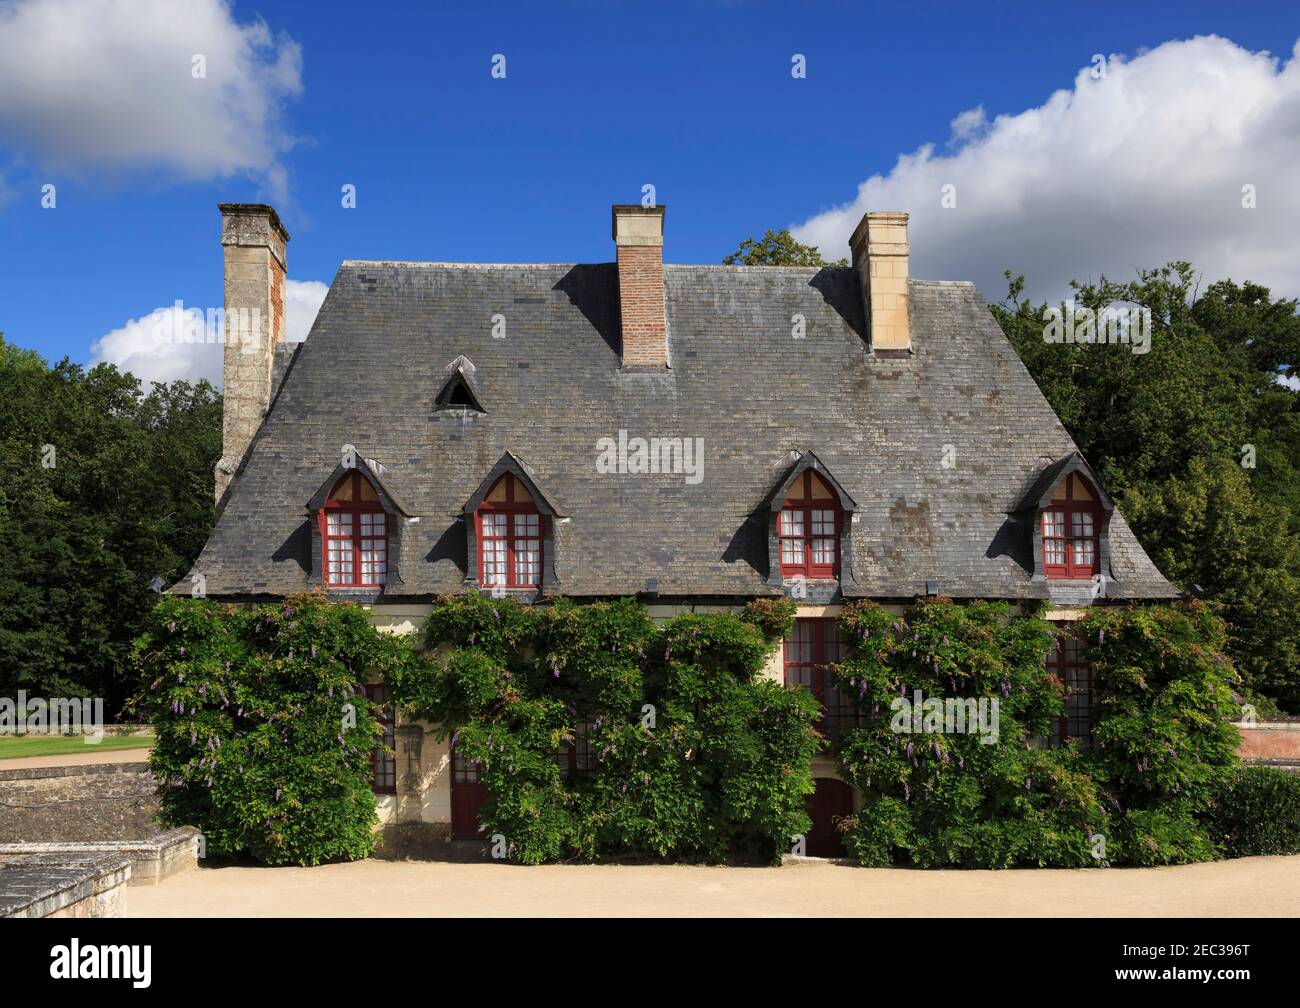 Steward's House, La Chancellerie, at Chateau Chenonceau, Loire Valley. 16th century house overlooking the garden. Stock Photo